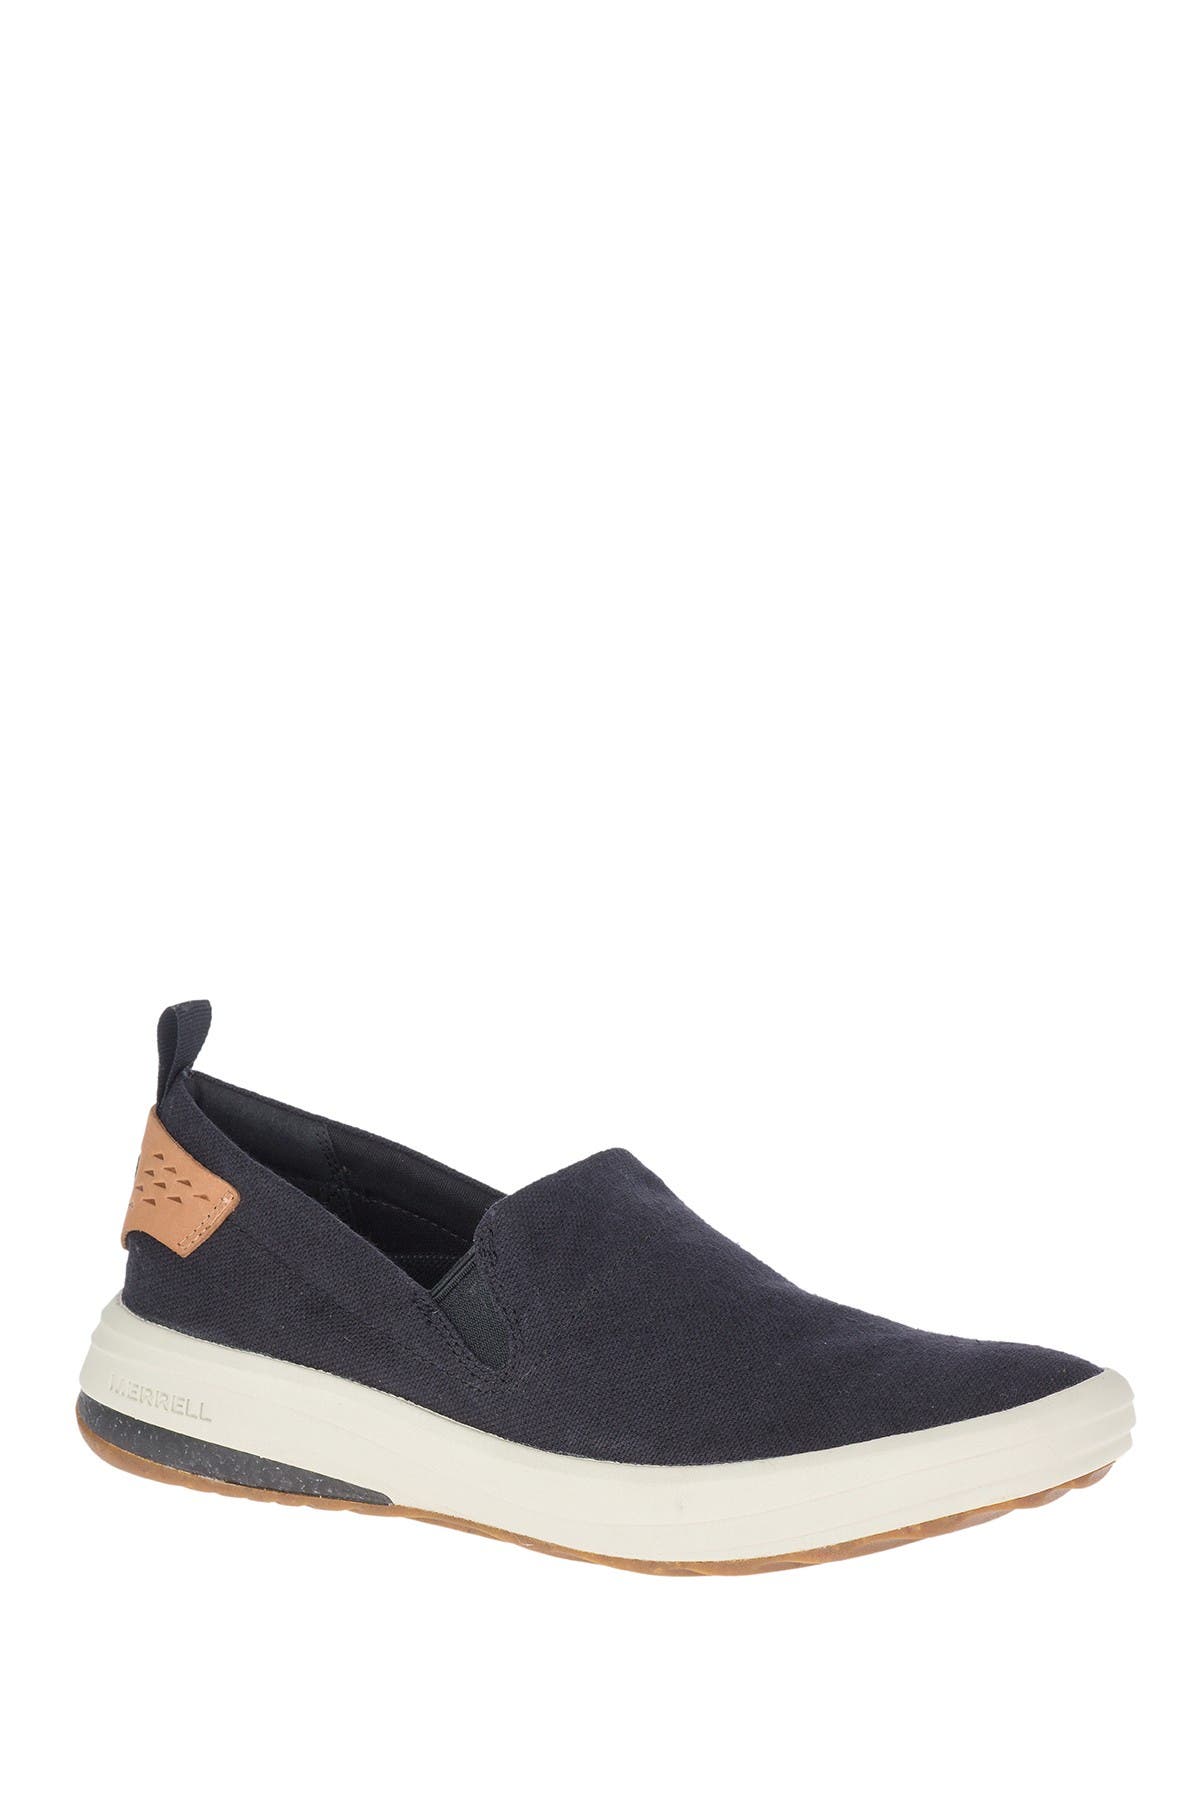 merrell canvas slip on shoes